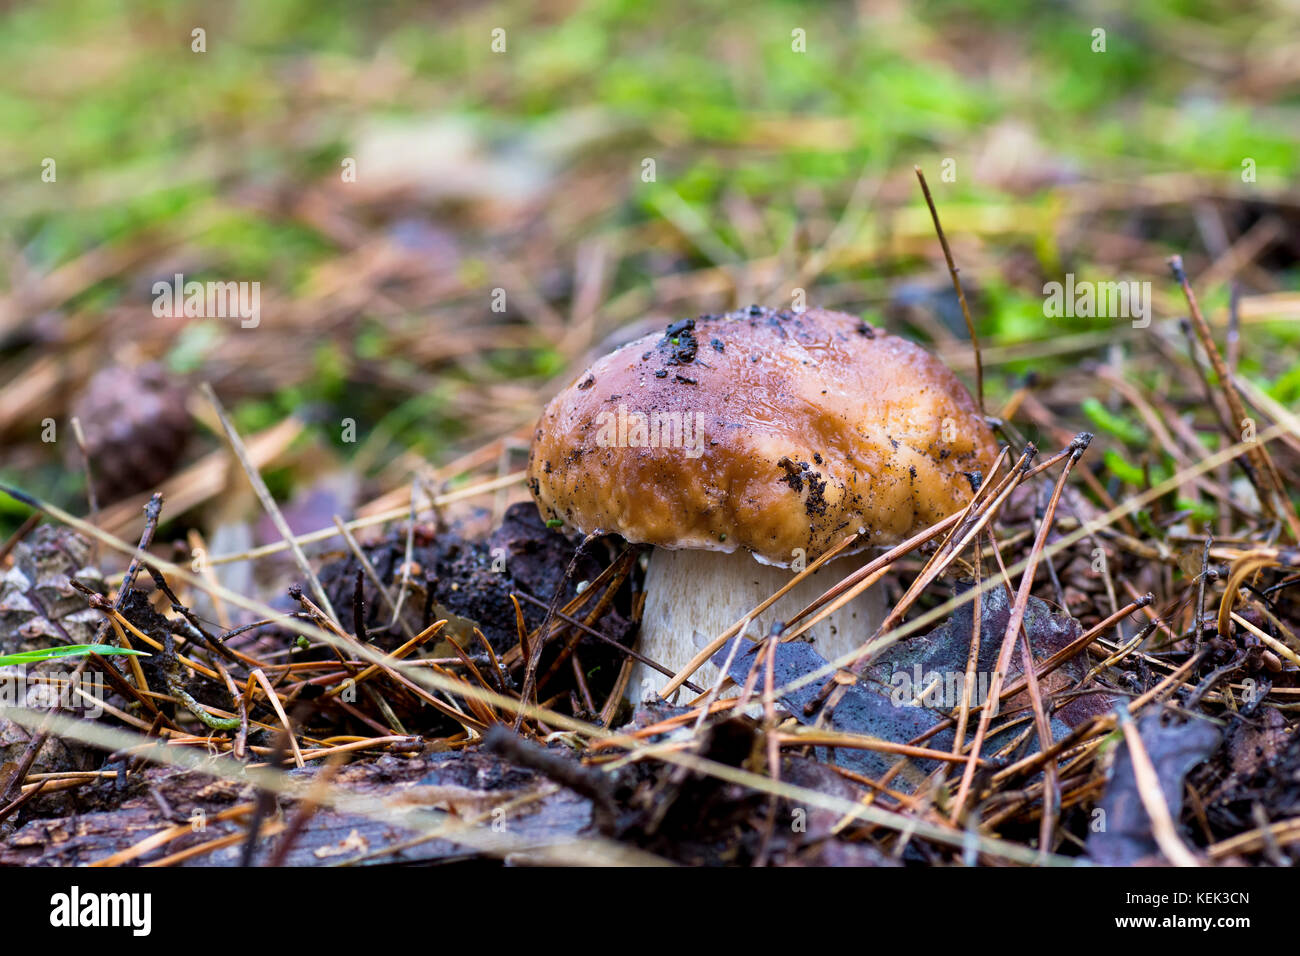 Close-up photo of a mushroom with drops of dew on moss and between a needle in a forest in an autumn day with a blurred background Stock Photo